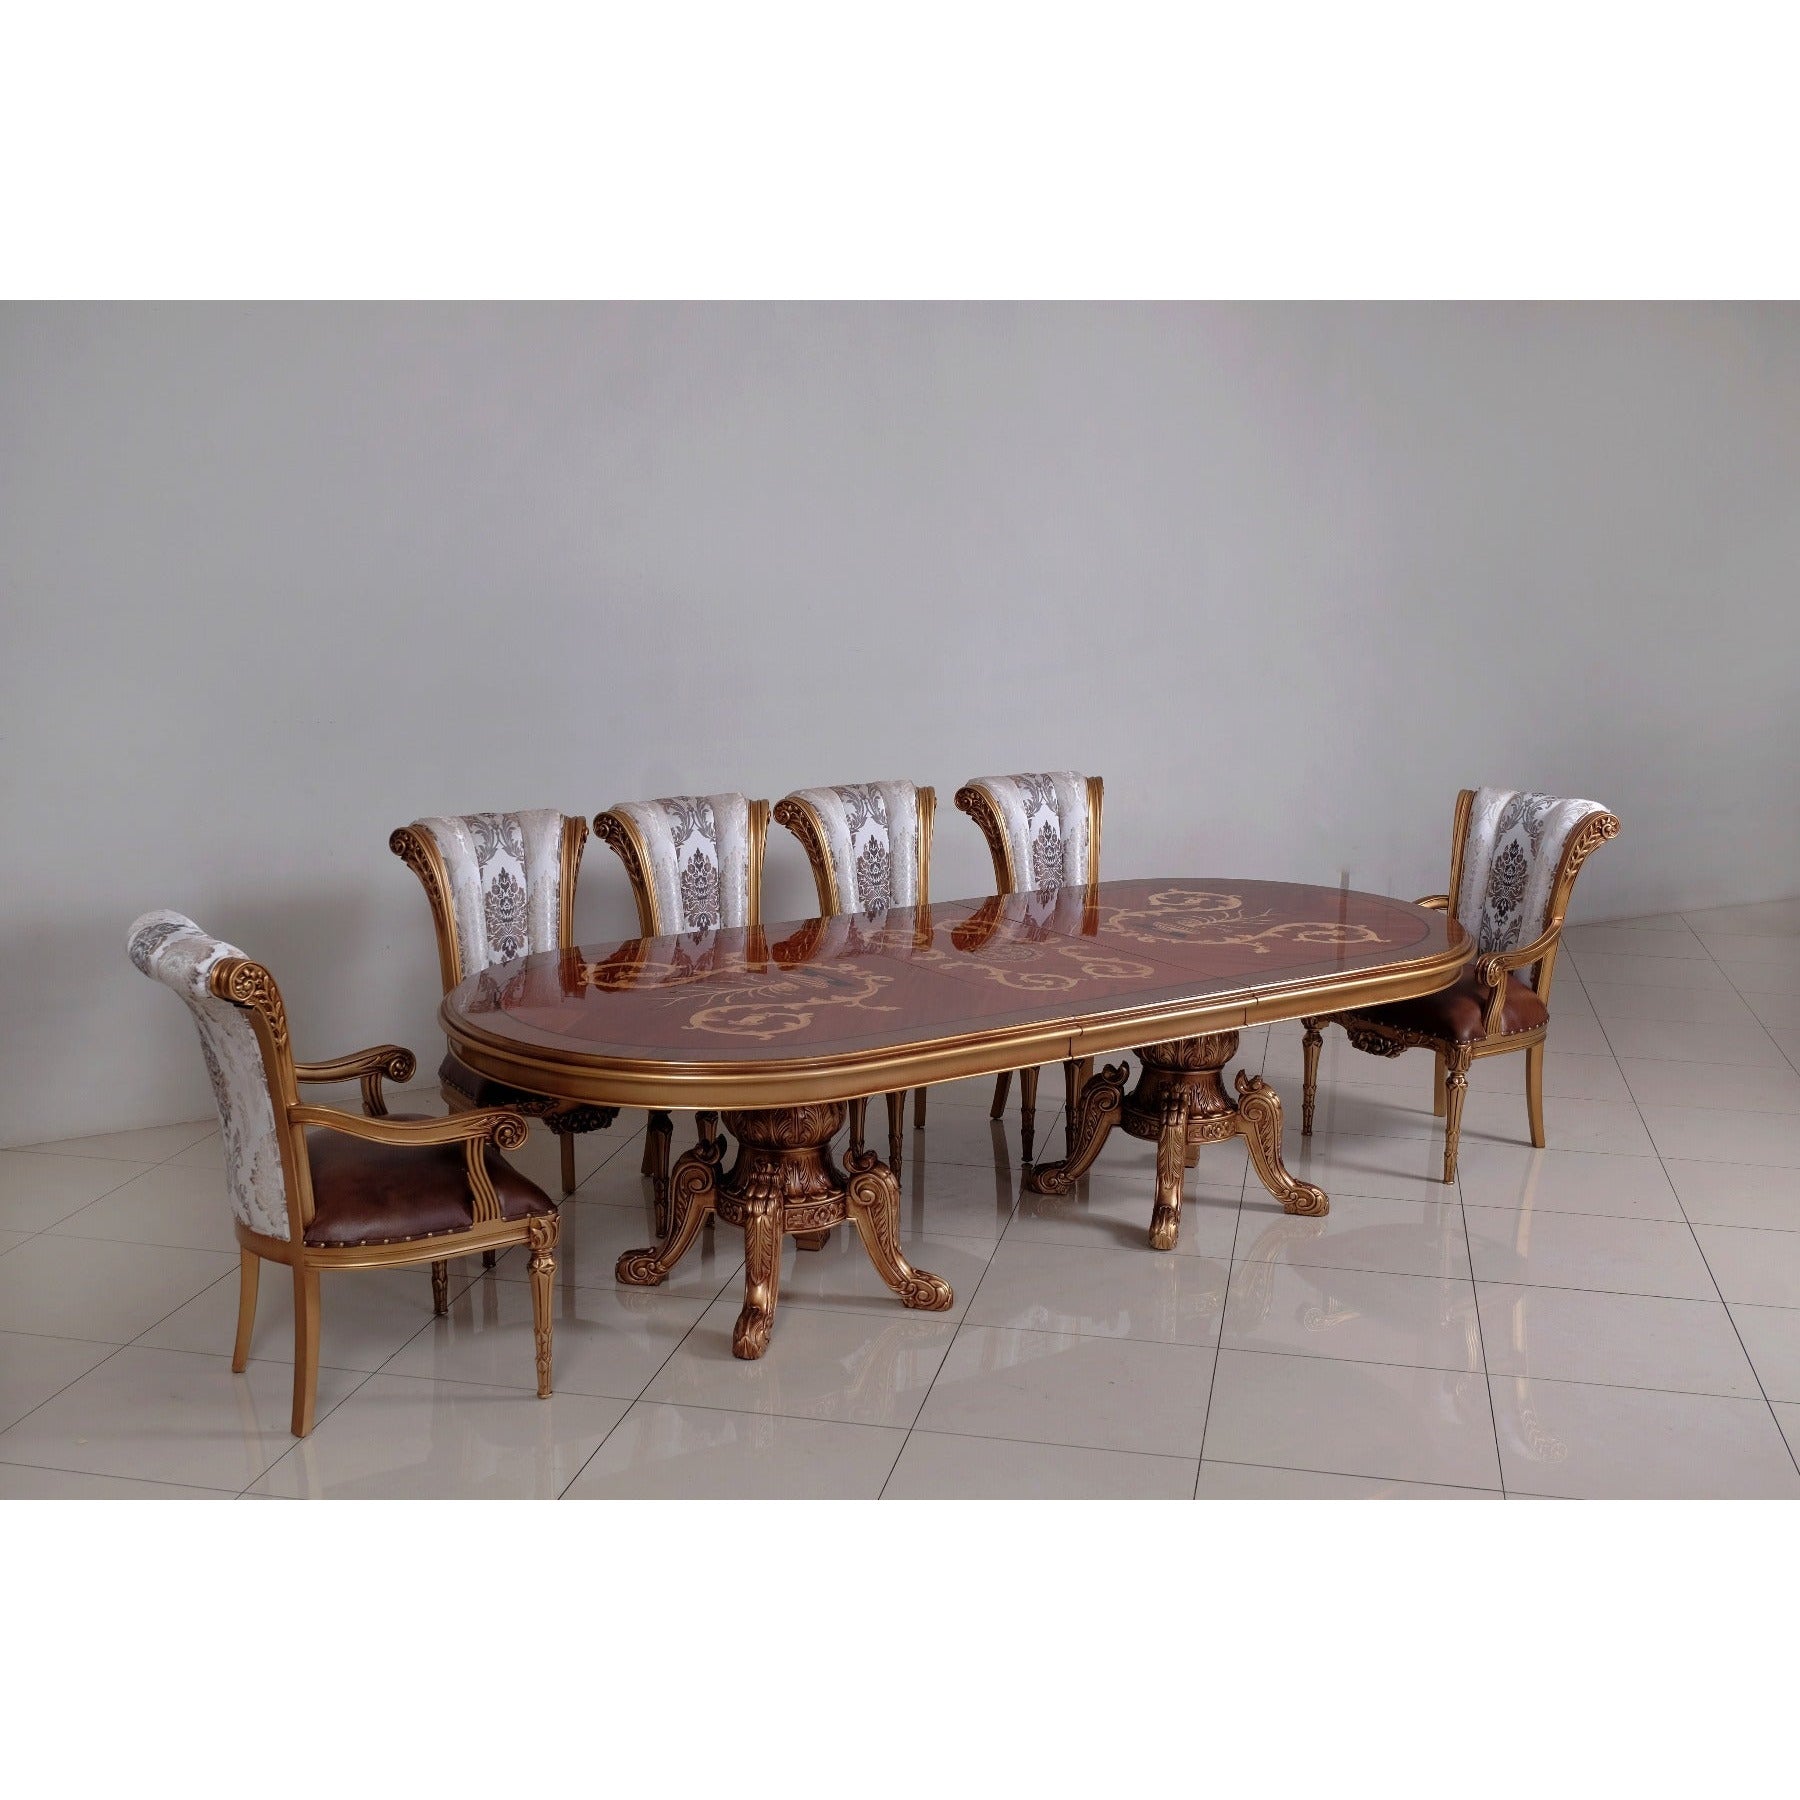 European Furniture - Maggiolini Dining Table in Brown and Gold Leaf - 61952-DT - New Star Living